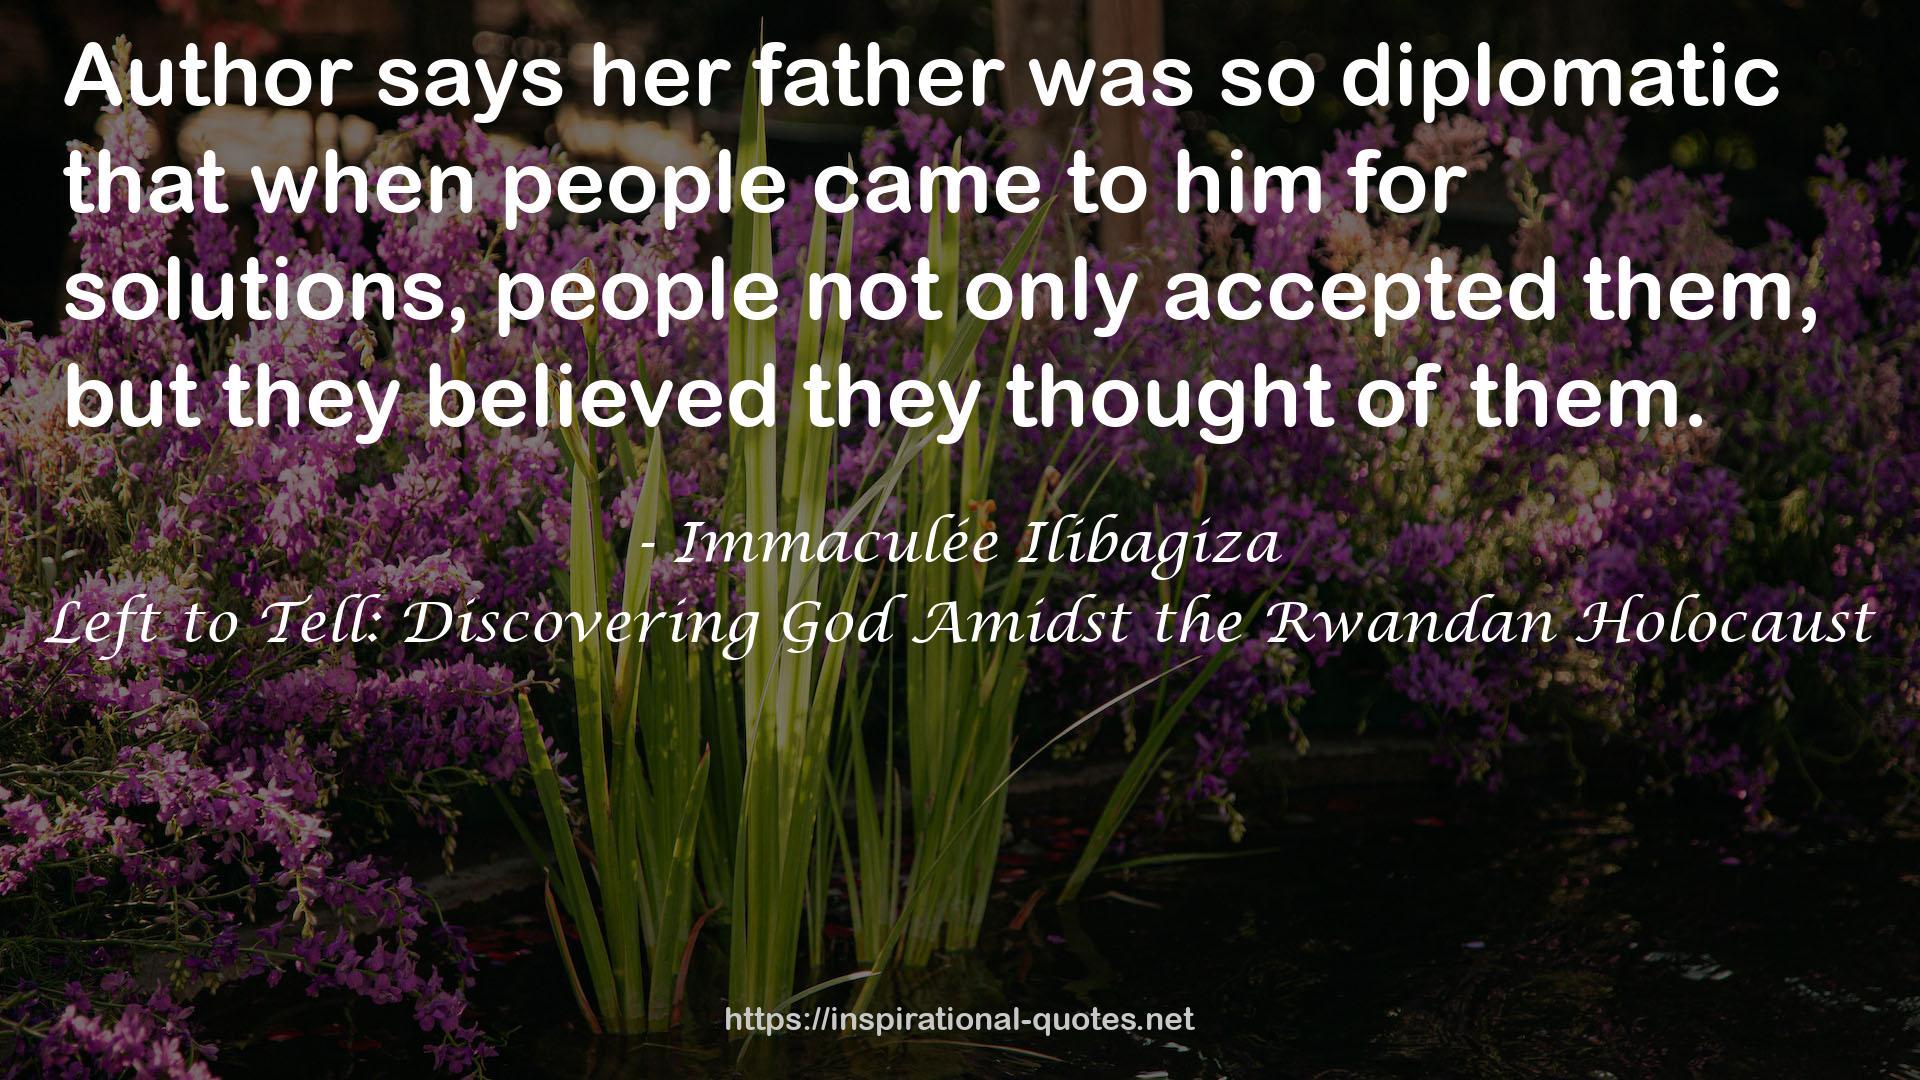 Left to Tell: Discovering God Amidst the Rwandan Holocaust QUOTES